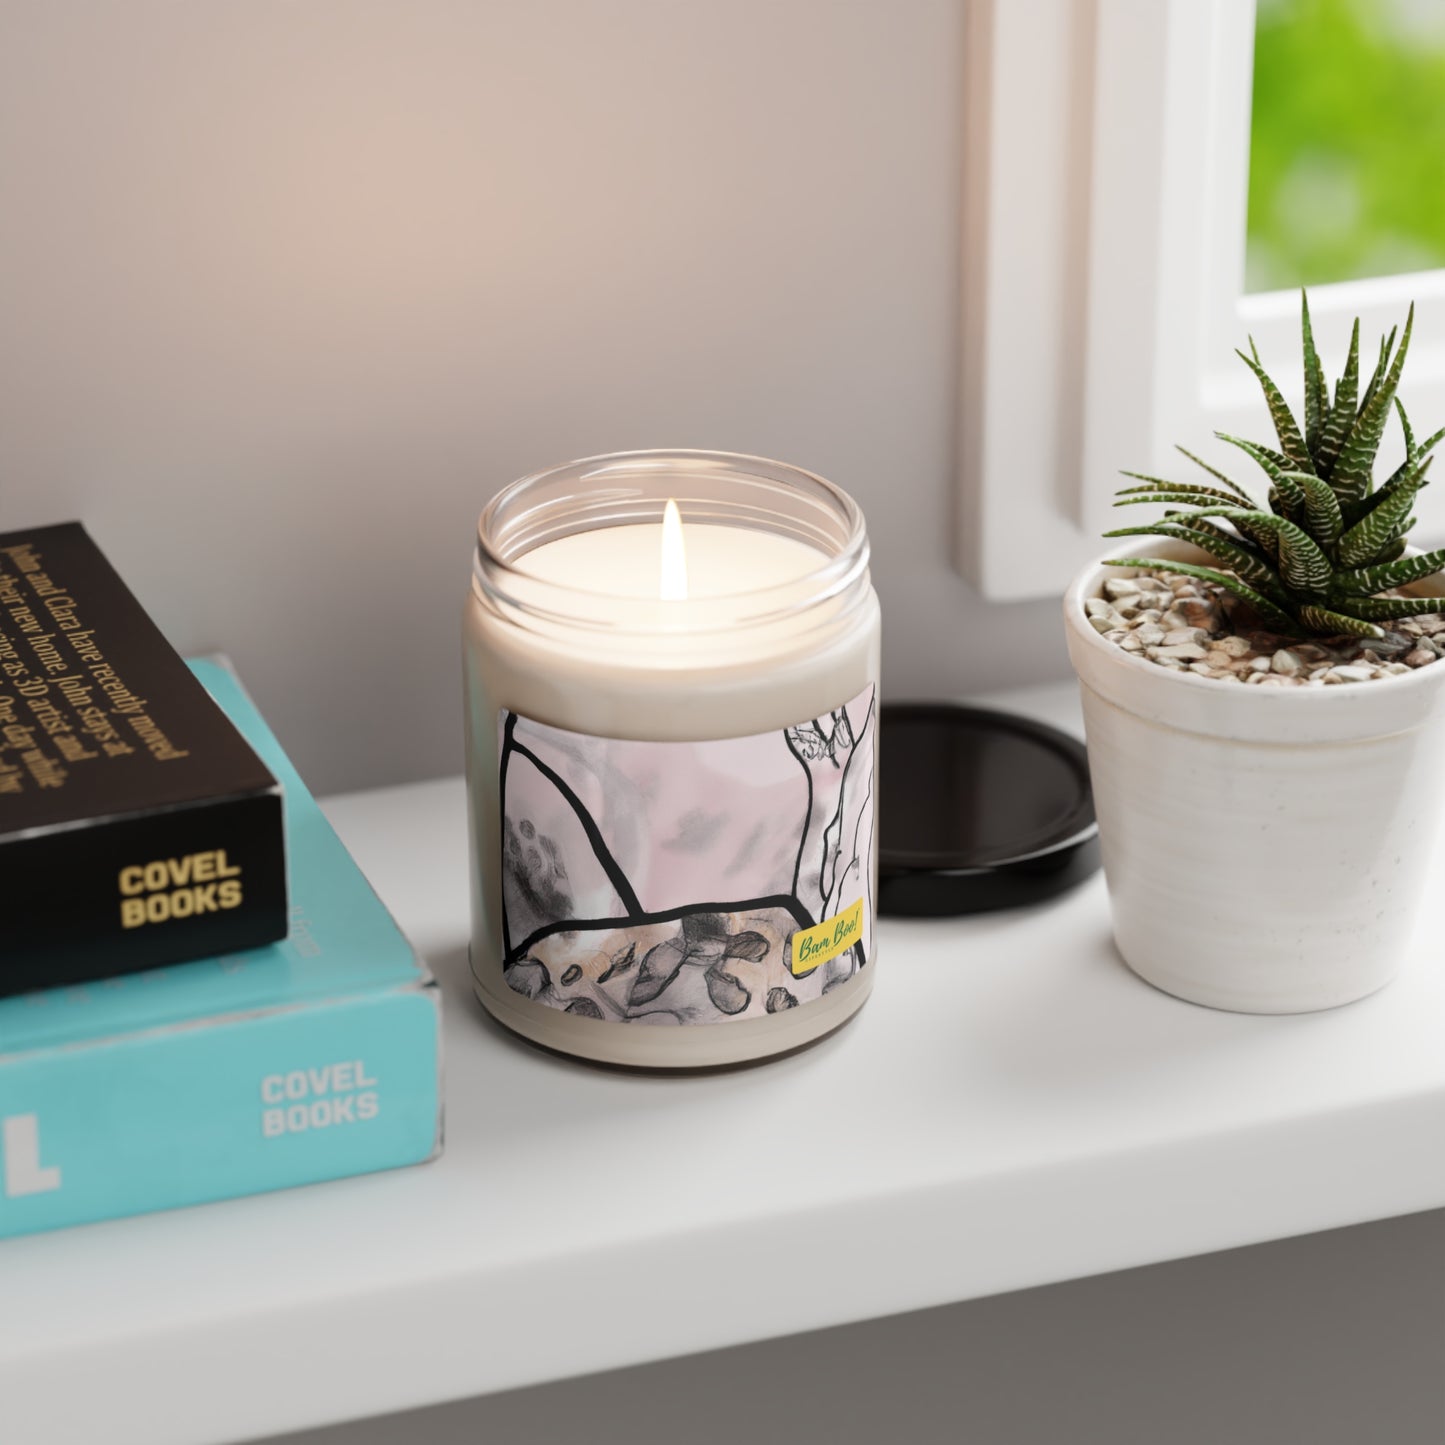 "The Natural Exuberance of Abstraction" - Bam Boo! Lifestyle Eco-friendly Soy Candle